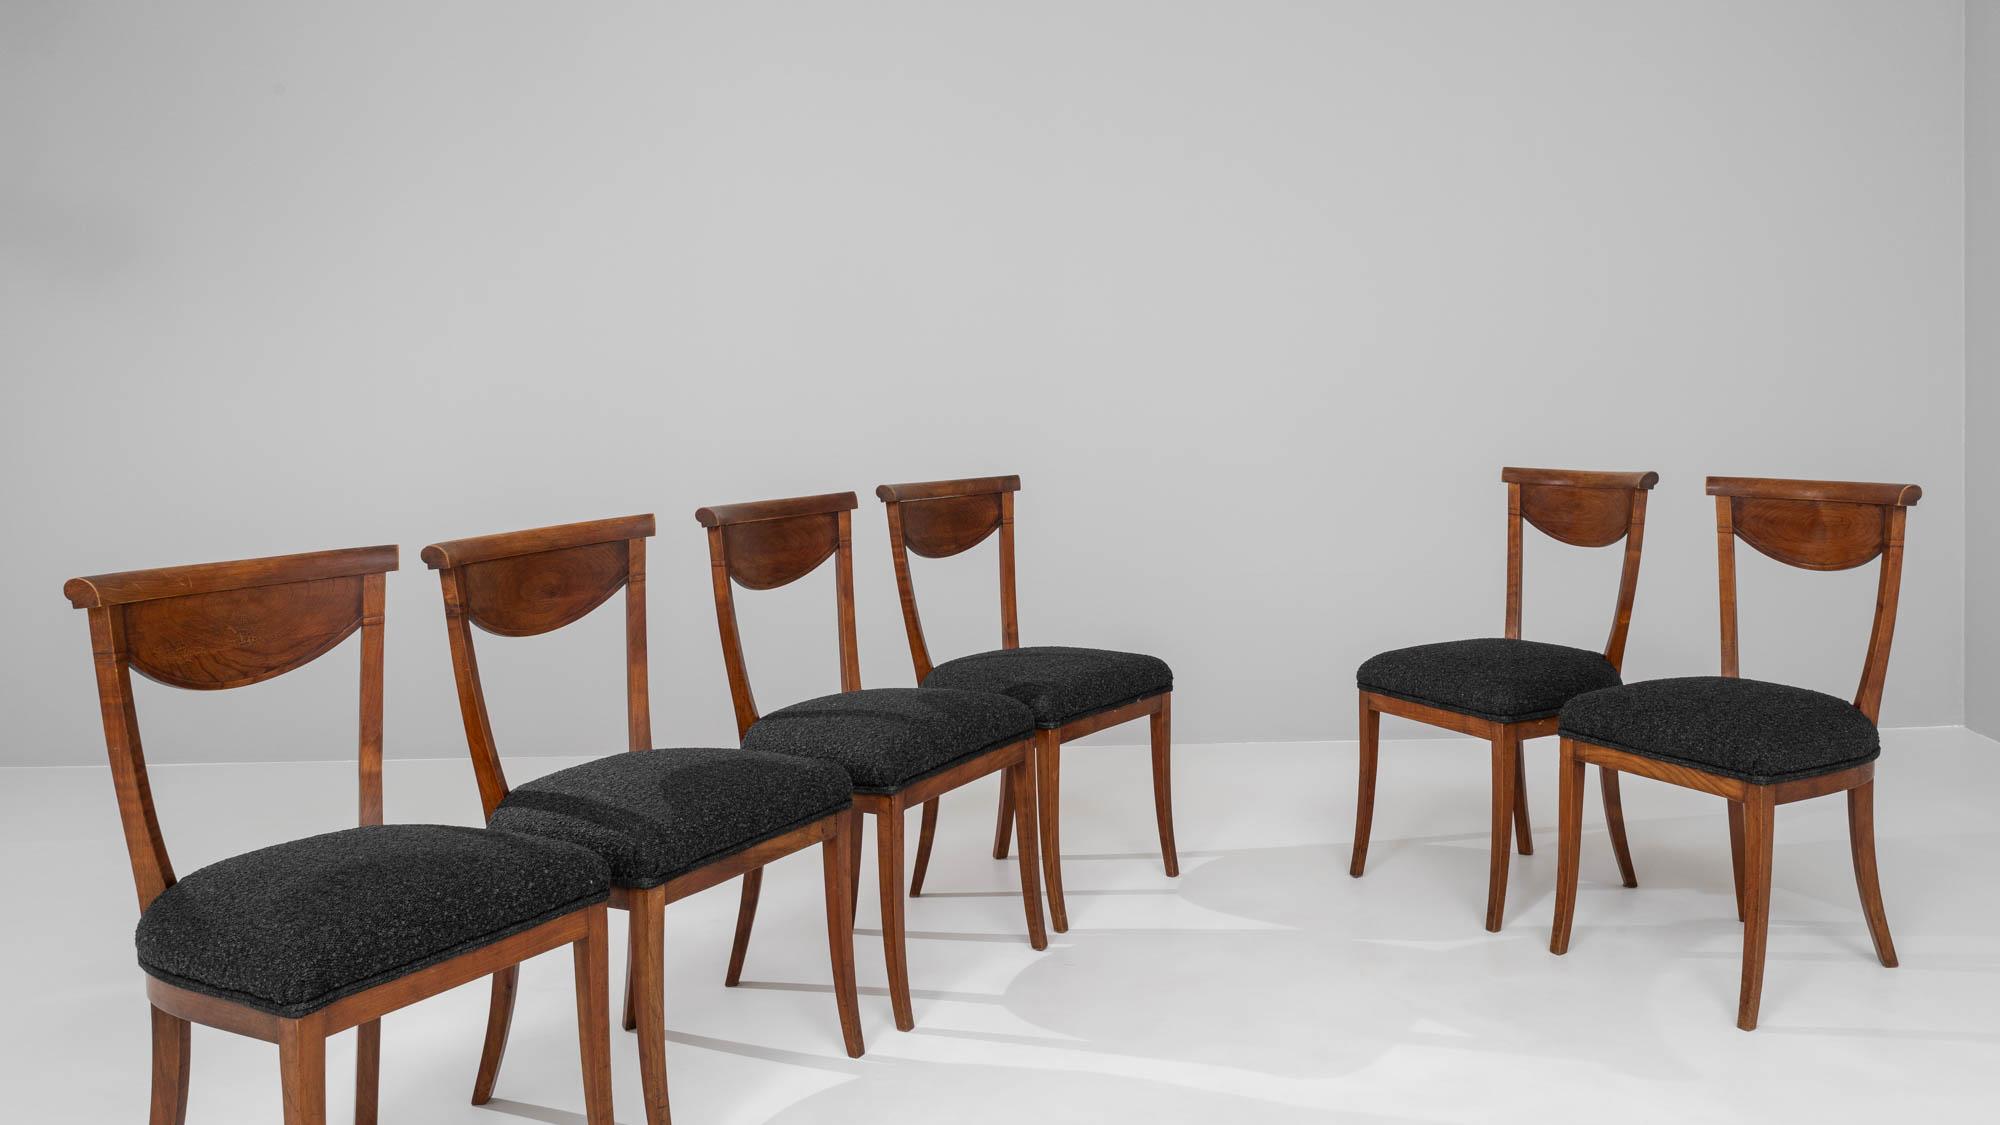 19th Century French Wooden Dining Chairs With Upholstered Seats, Set of 6 For Sale 9